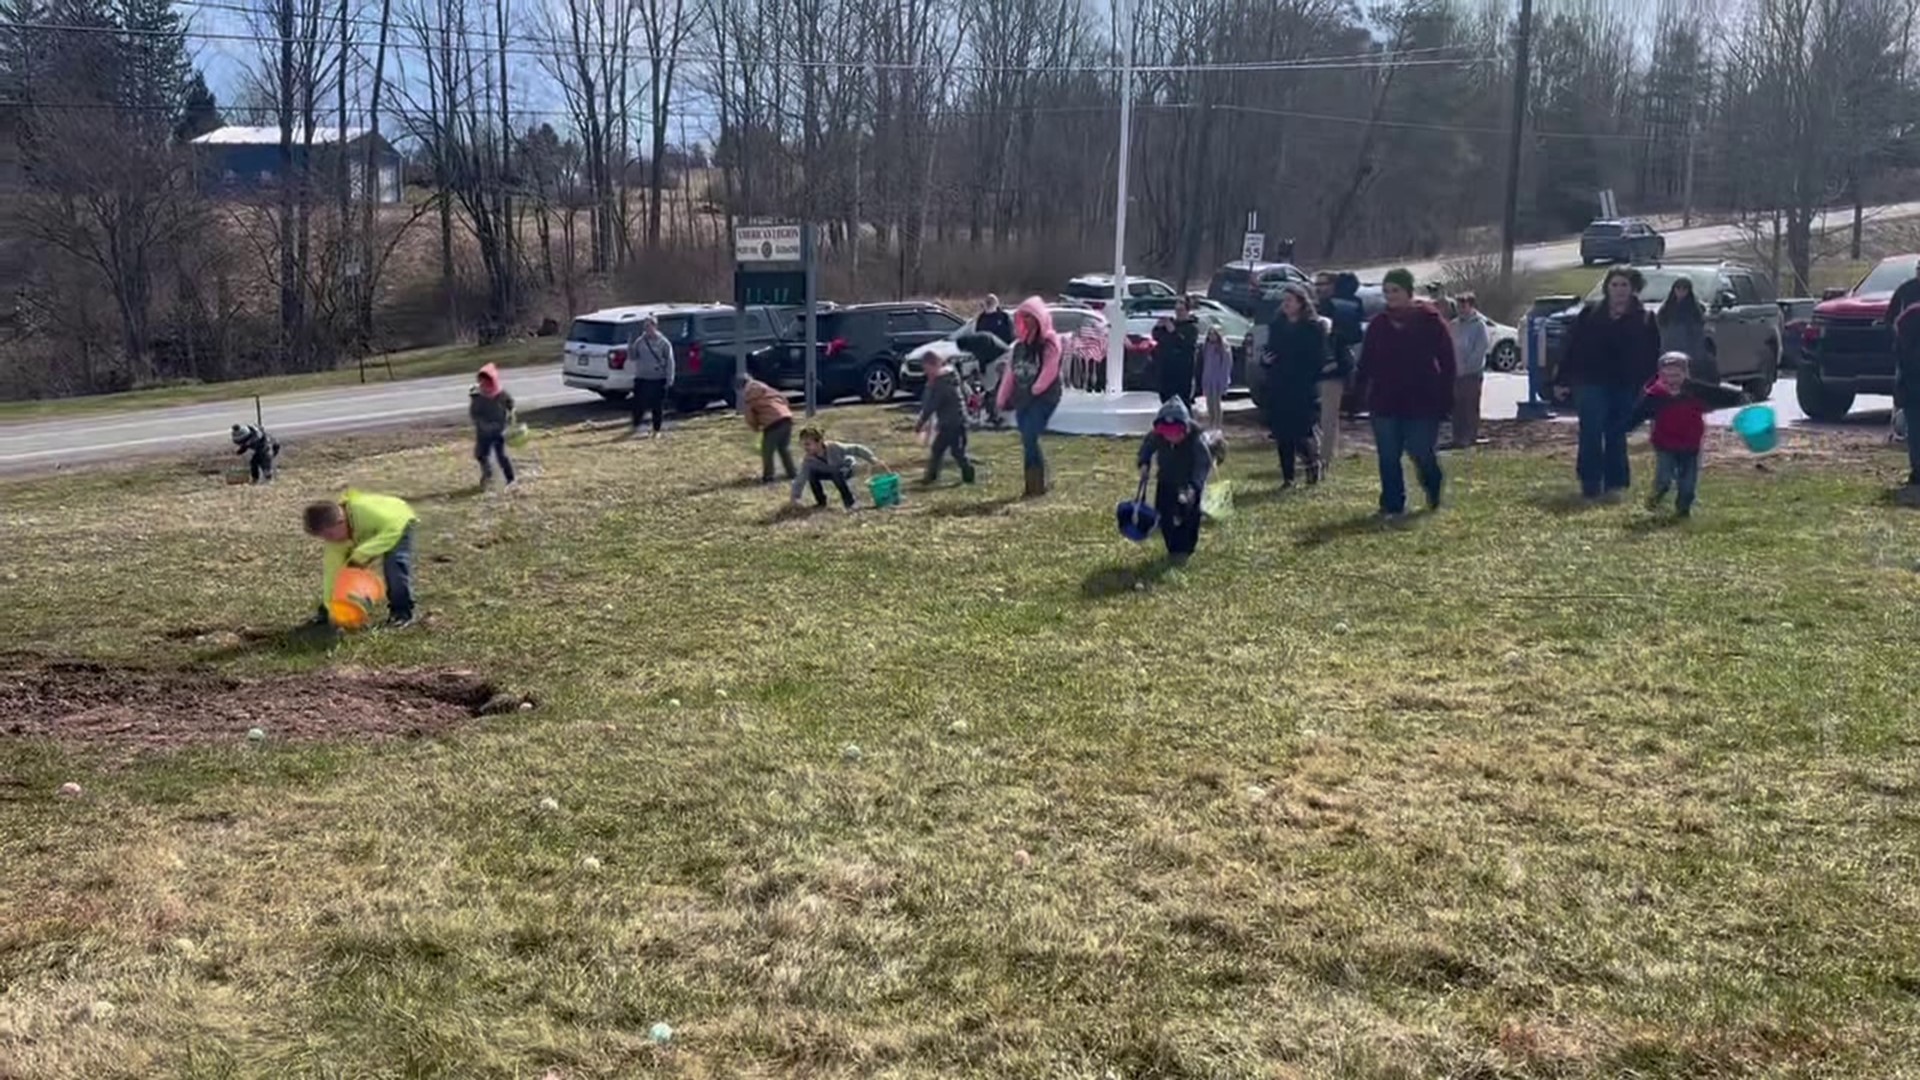 Families came together Saturday morning for a decades-long Easter egg hunt tradition at the American Legion Loyalsock Post 996 in Dushore.